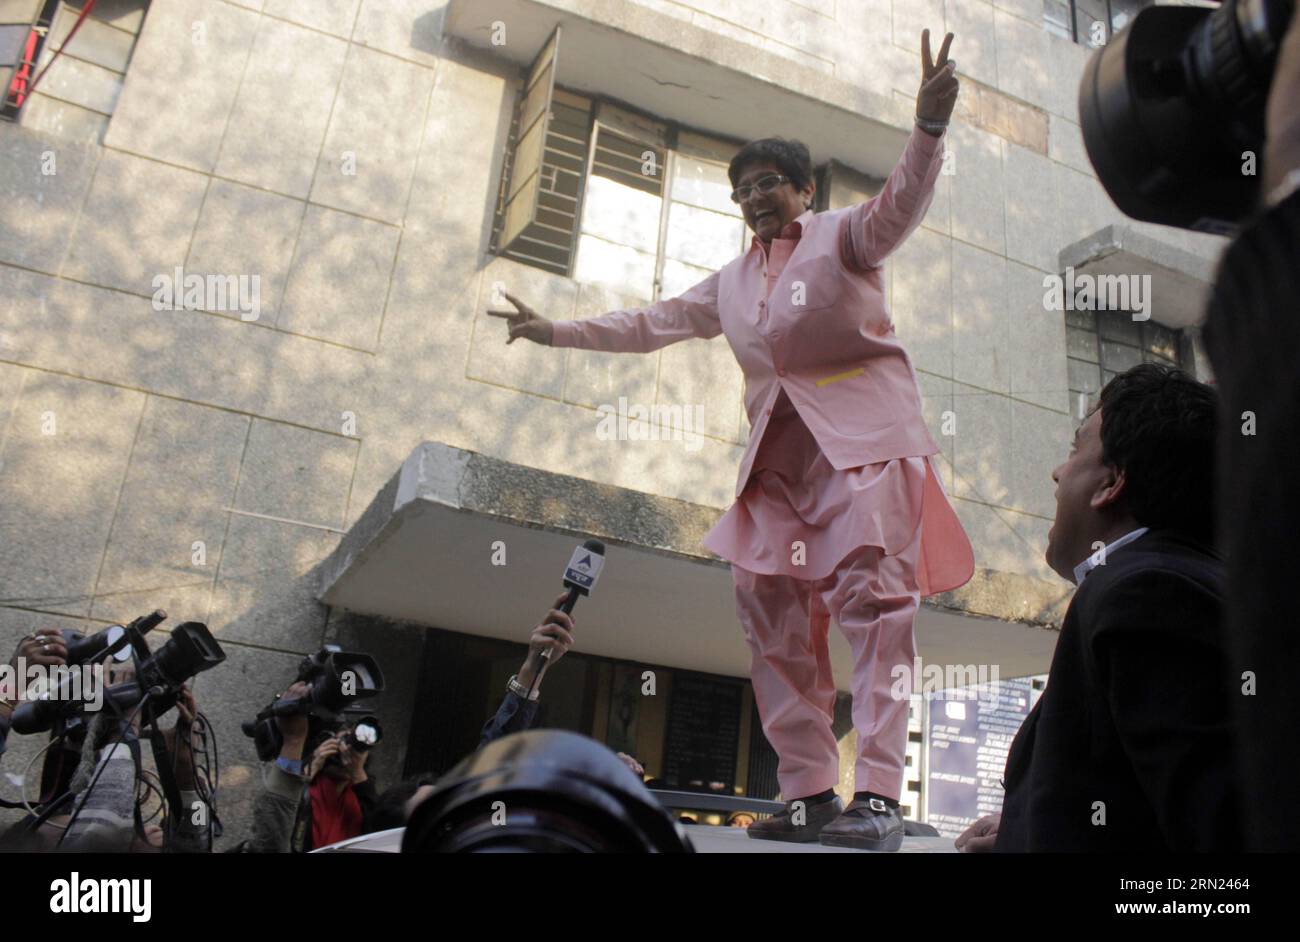 (150207) -- NEW DELHI, Feb. 7, 2015 -- Bharatiya Janata Party (BJP) Chief Ministerial candidate Kiran Bedi poses for photos after casting her vote during the Delhi assembly election at a polling booth in New Delhi, India, Feb. 7, 2015. The Indian capital New Delhi went to polls Saturday, in what is being seen as a closely contested fight between the country s ruling Bharatiya Janata Party (BJP) and the anti-corruption Aam Aadmi Party (AAP) led by former civil servant-turned-politician Arvind Kejriwal. ) INDIA-NEW DELHI-ASSEMBLY ELECTION ParthaxSarkar PUBLICATIONxNOTxINxCHN   New Delhi Feb 7 20 Stock Photo